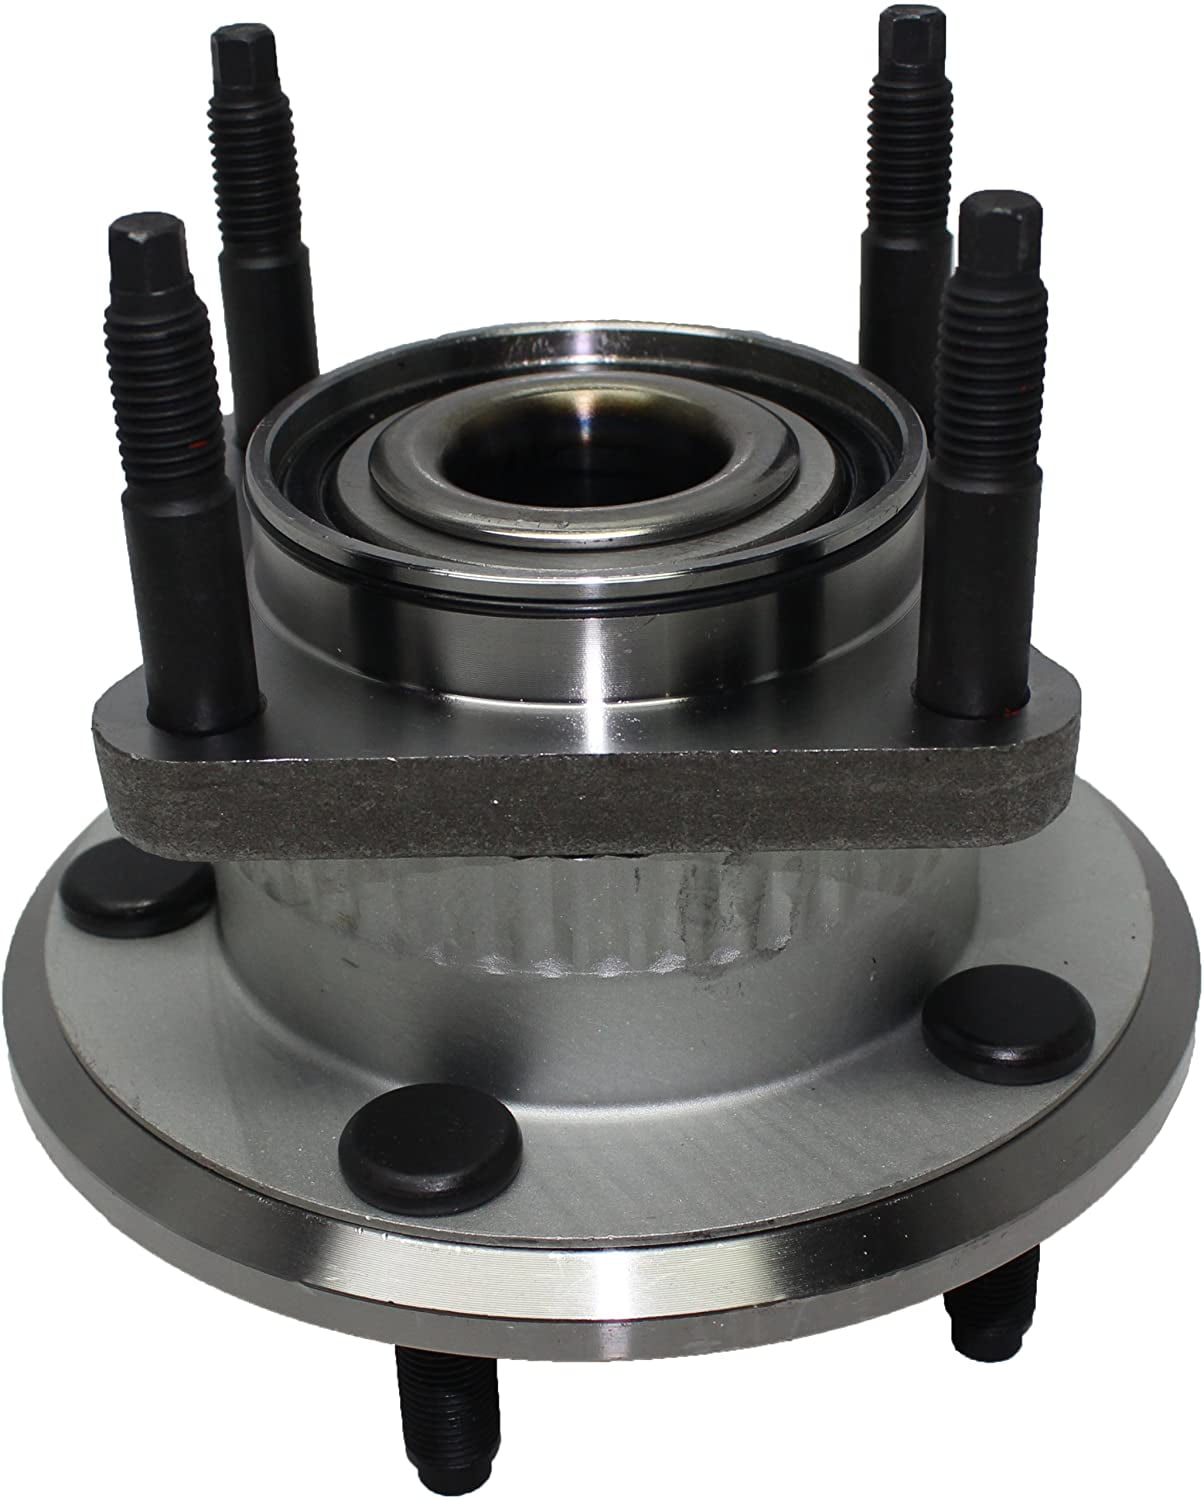 Both Detroit Axle - Rear Wheel Hub and Bearing Assembly For 2006-2010 Jeep Commander w/ABS - 2005-2010 Jeep Grand Cherokee w/ABS 